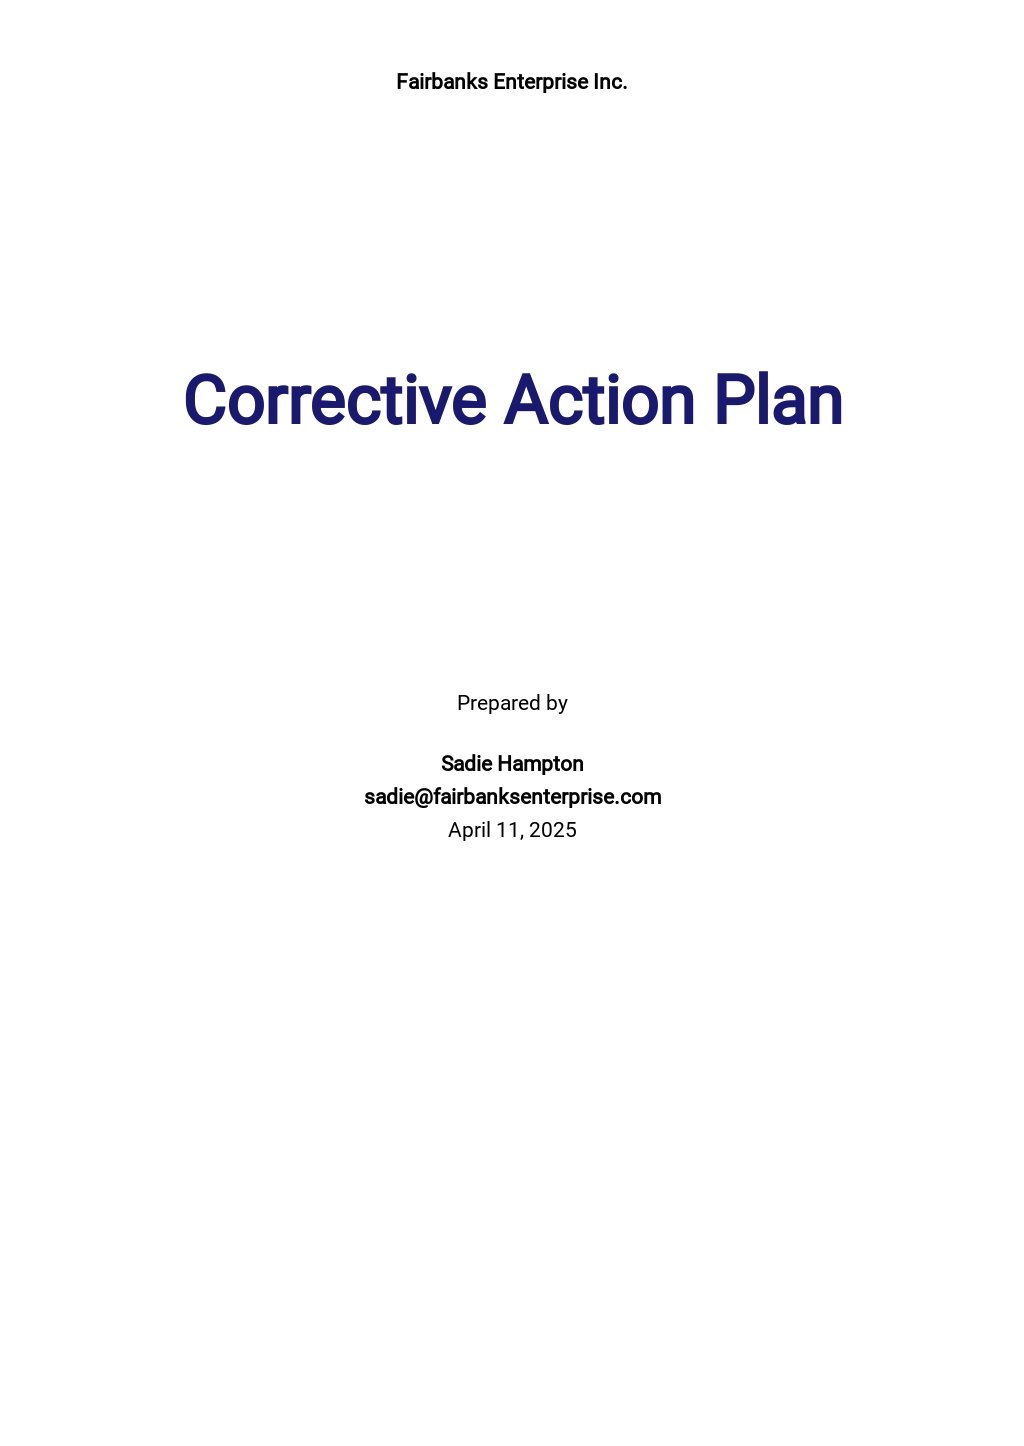 Research Corrective Action Plan Template Free PDF Google Docs Word